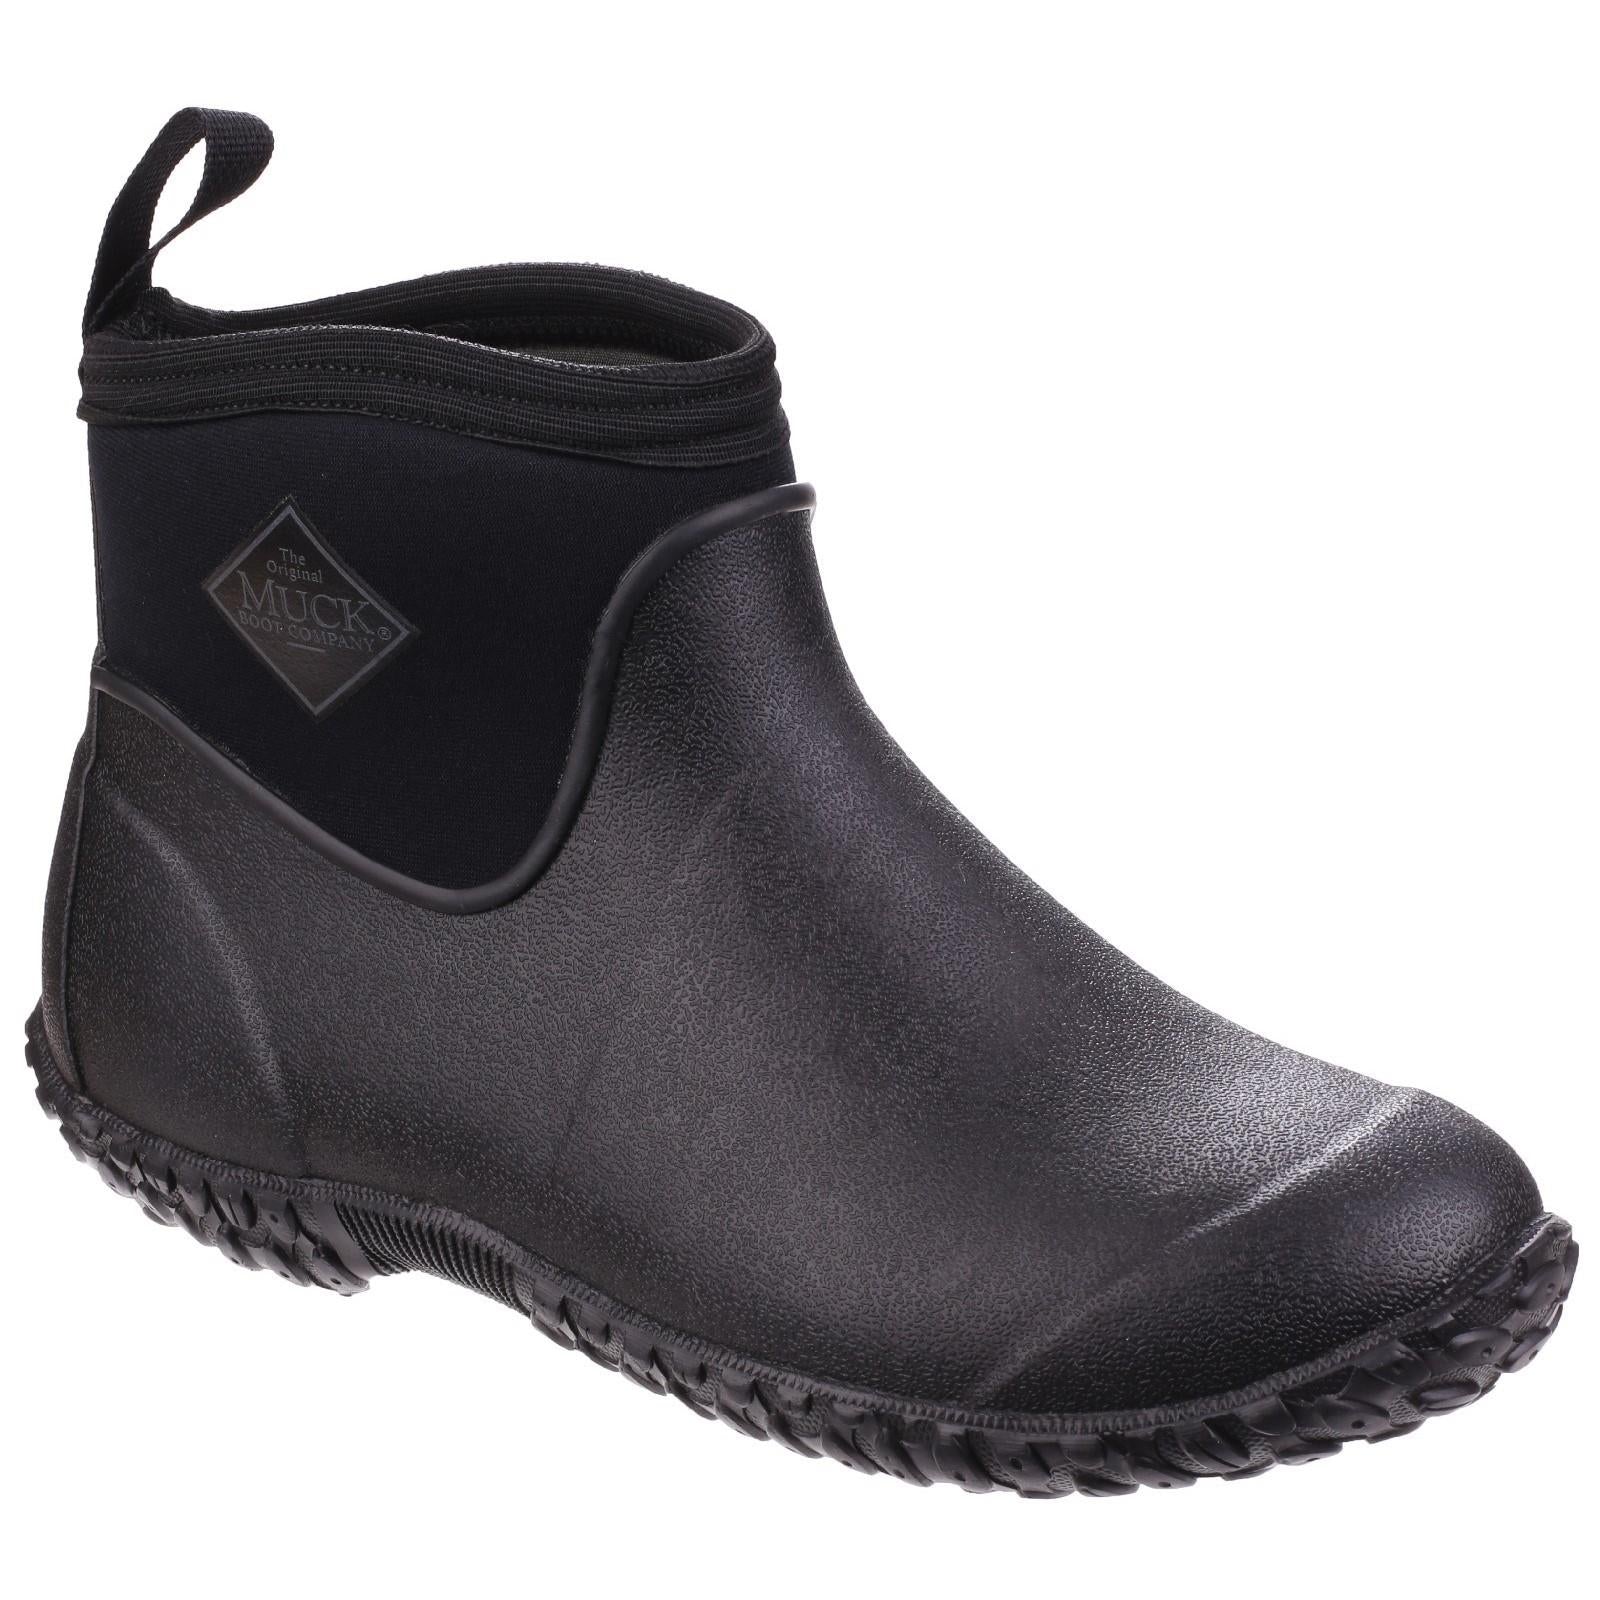 Muck Boots Muckster II black waterproof breathable garden pull on ankle boot